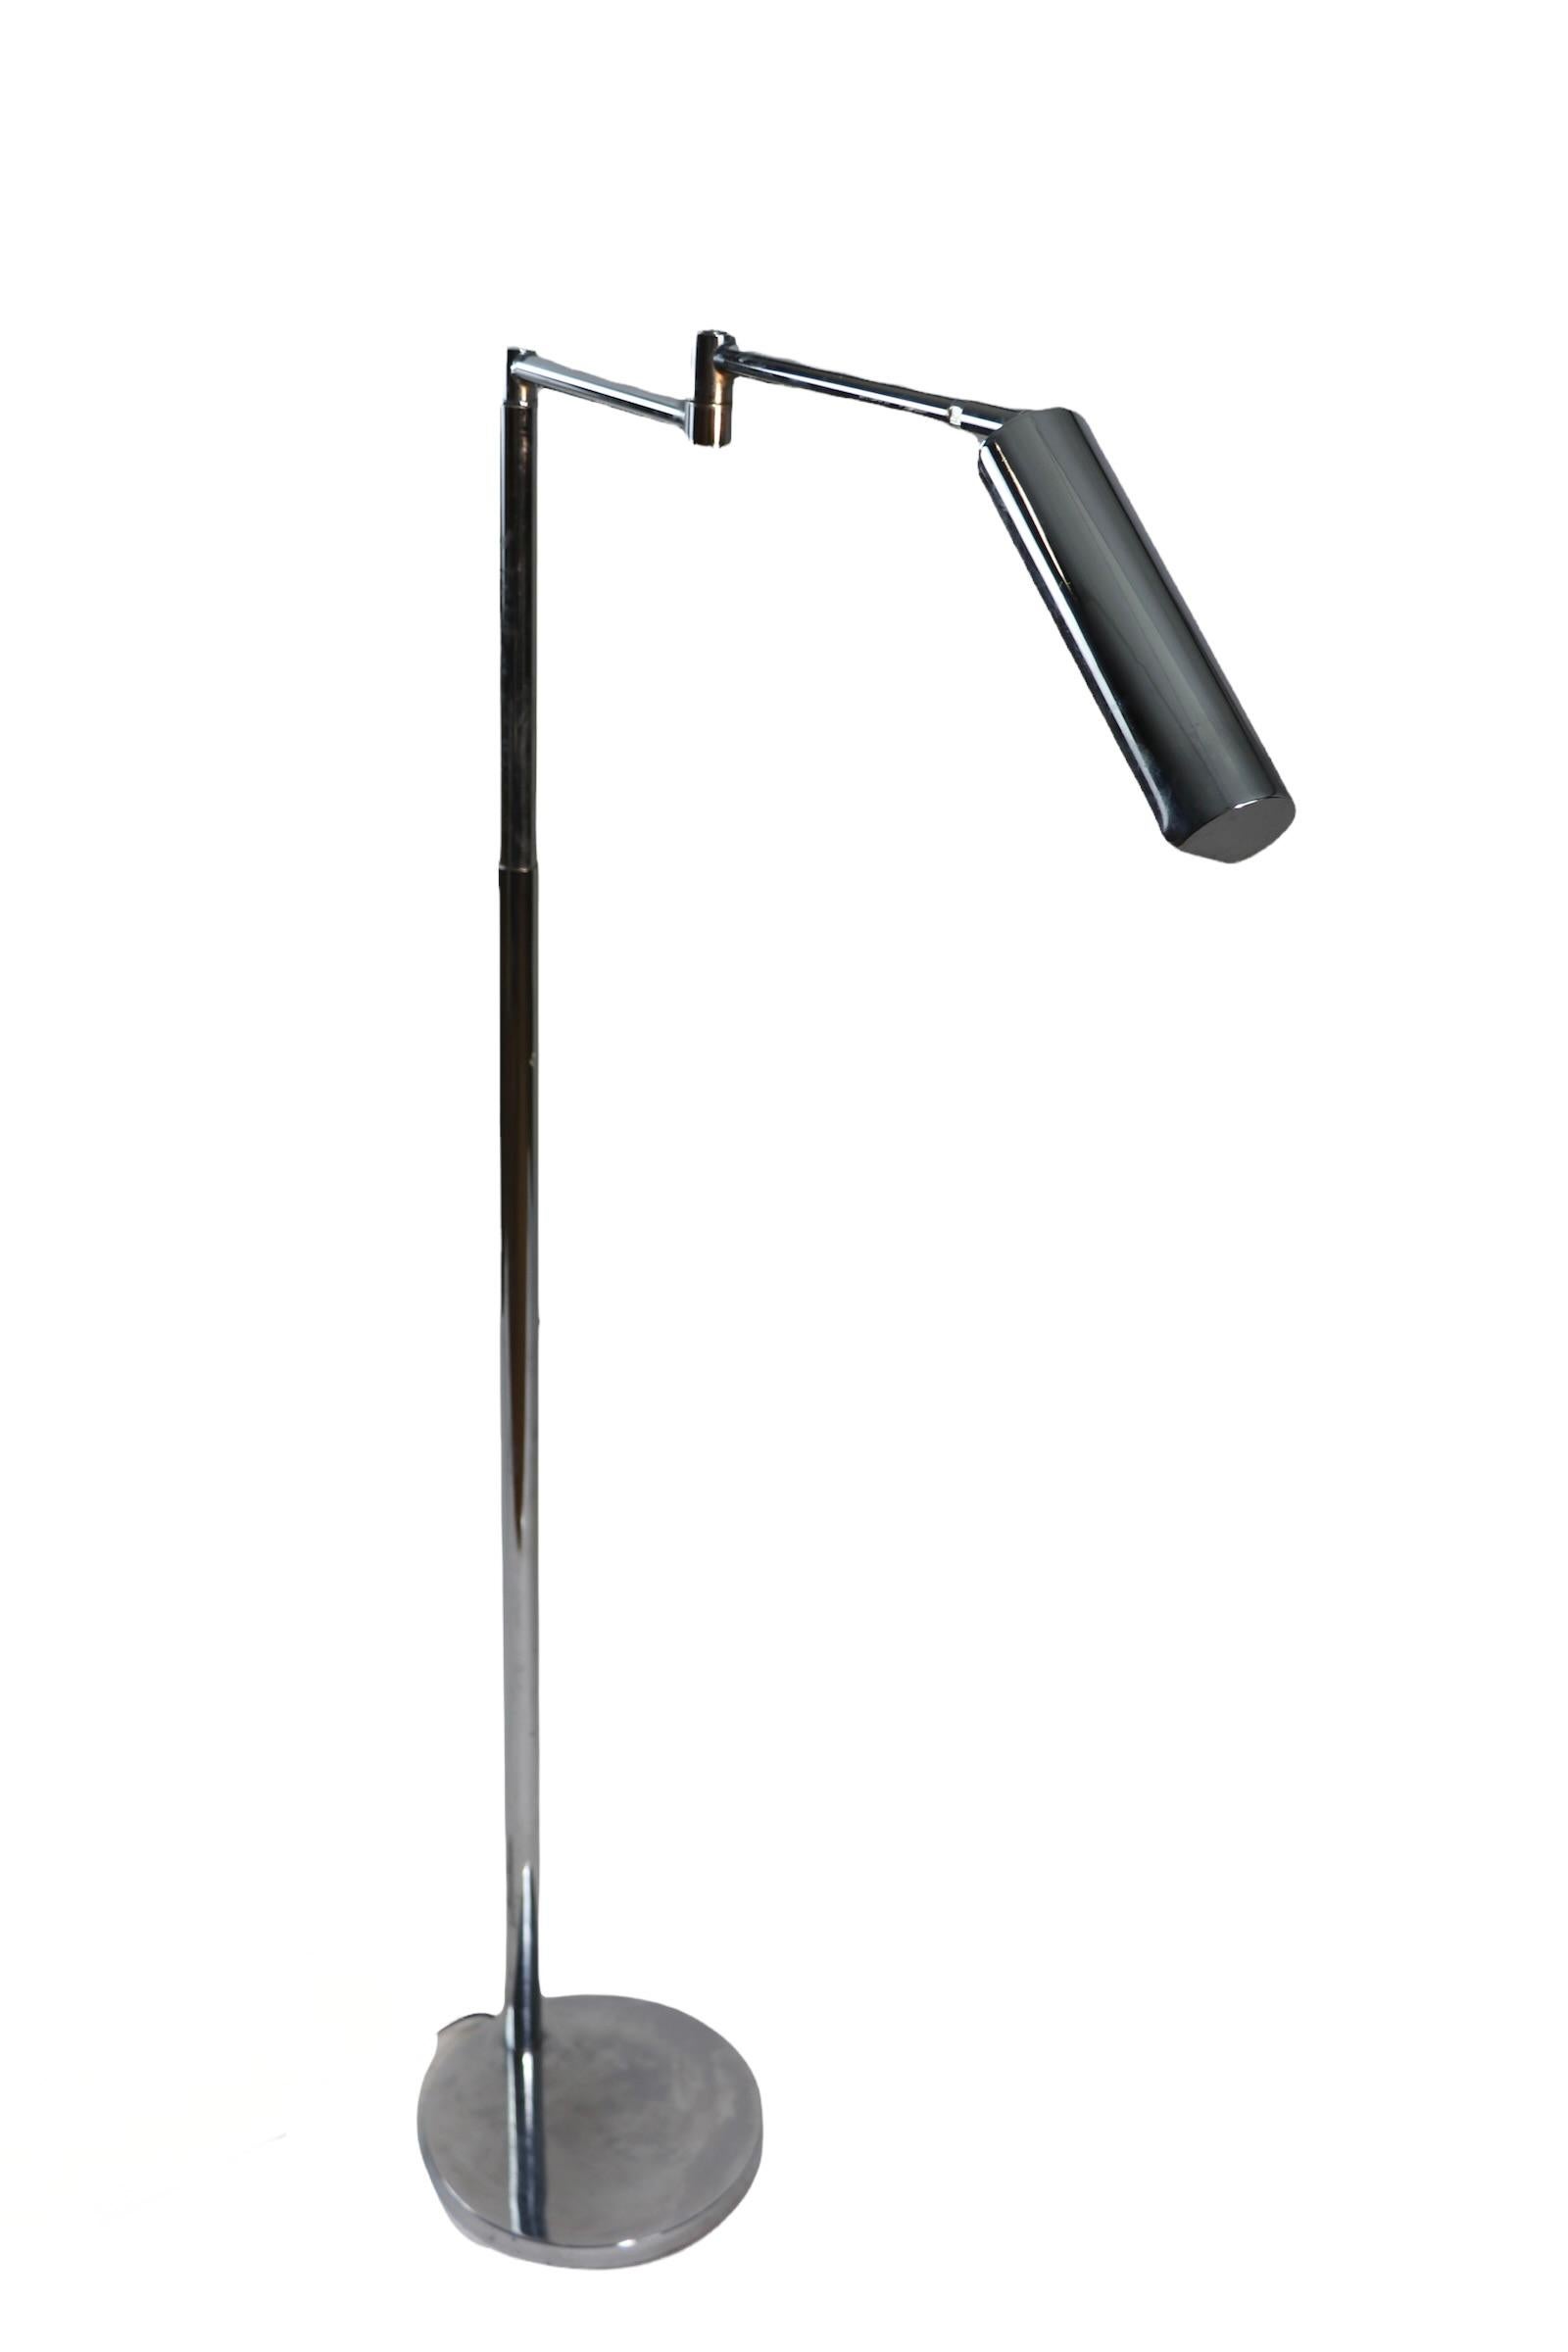 20th Century Adjustable Swing Arm Chrome Pharmacy Floor Lamp by Koch and Lowy OMI